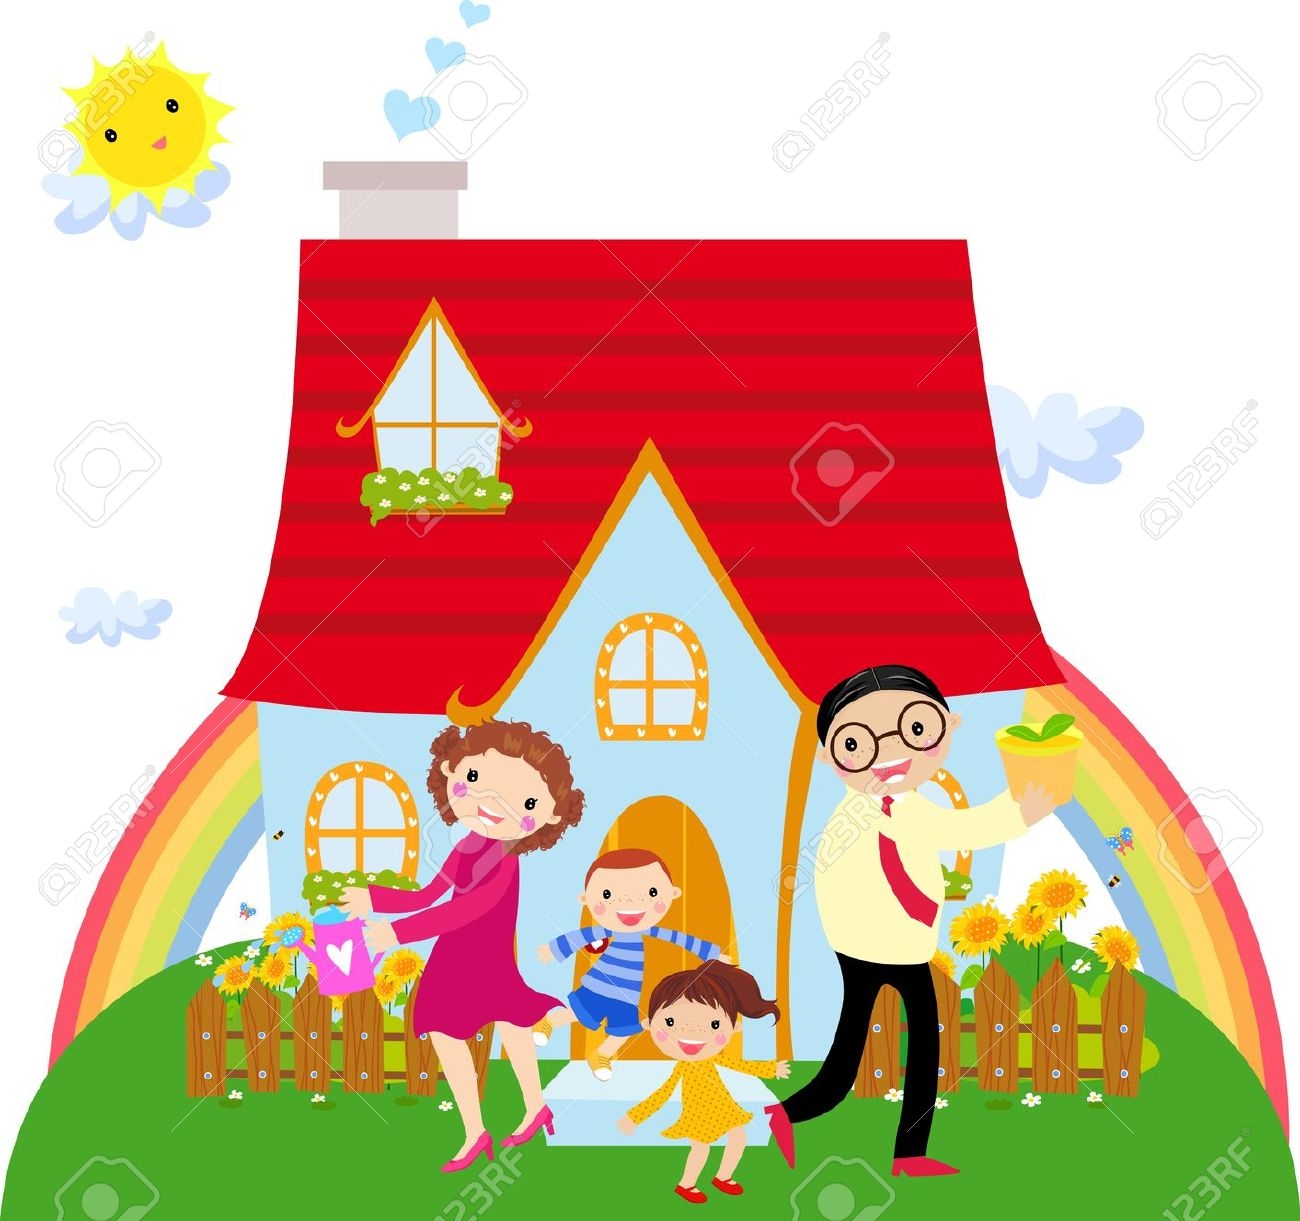 Home and family clipart